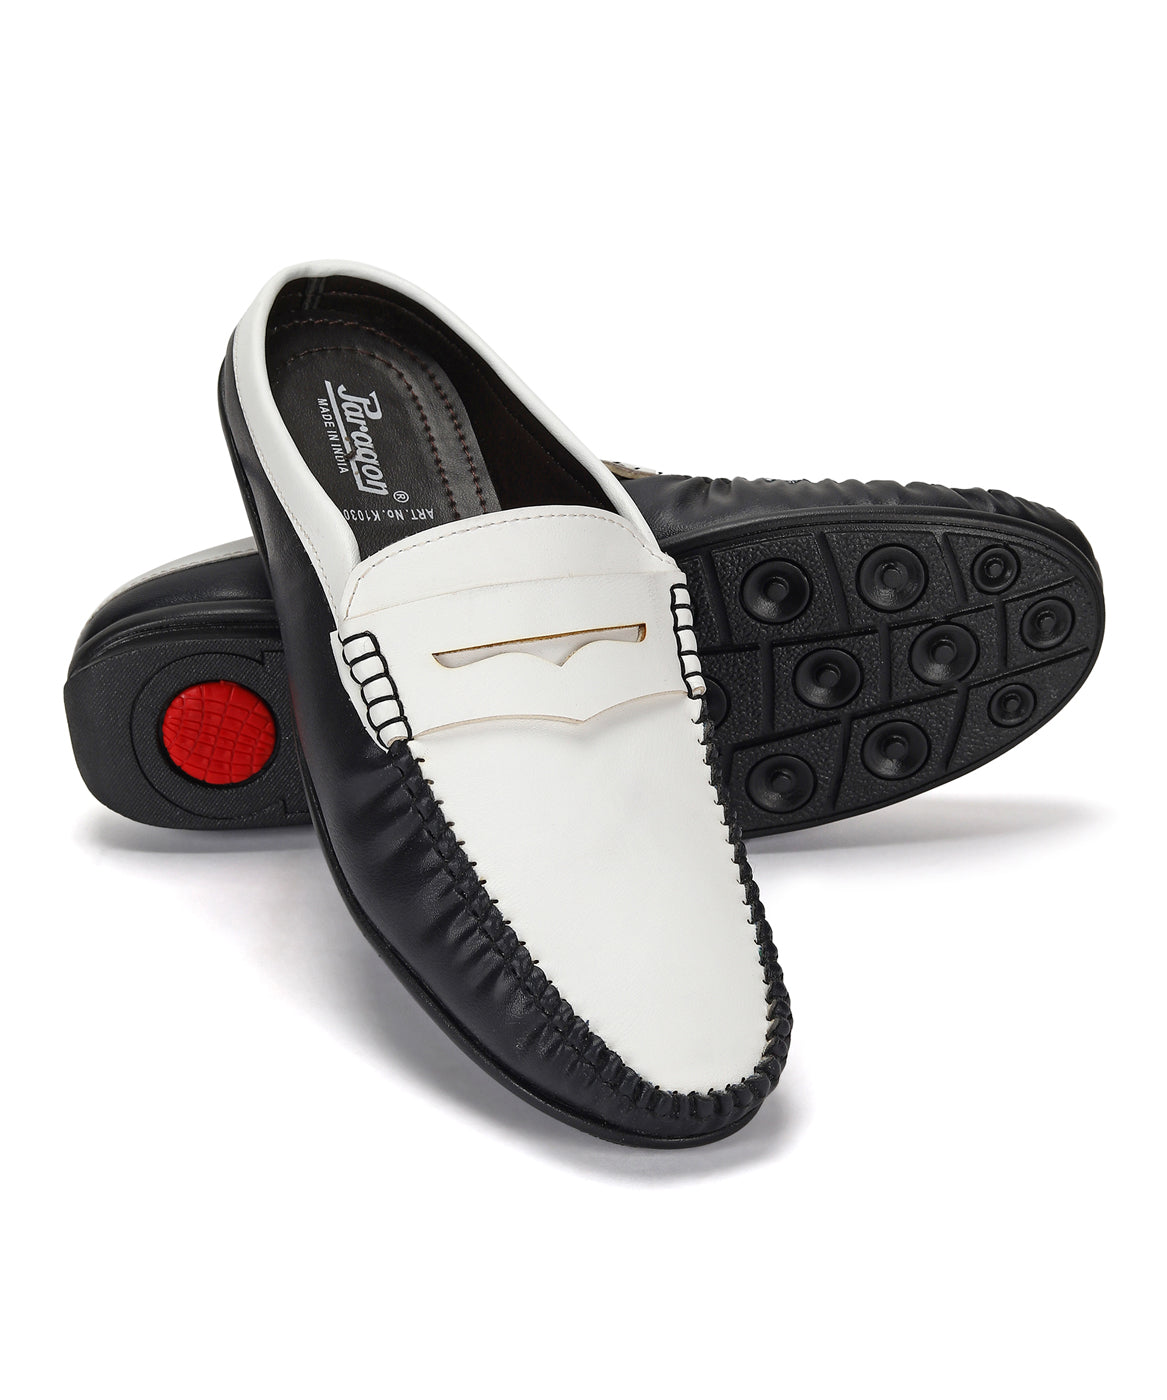 Paragon K1030G Men Mules with Sturdy &amp; Fashionable Construction and Comfortable Sole for All-Day Comfort